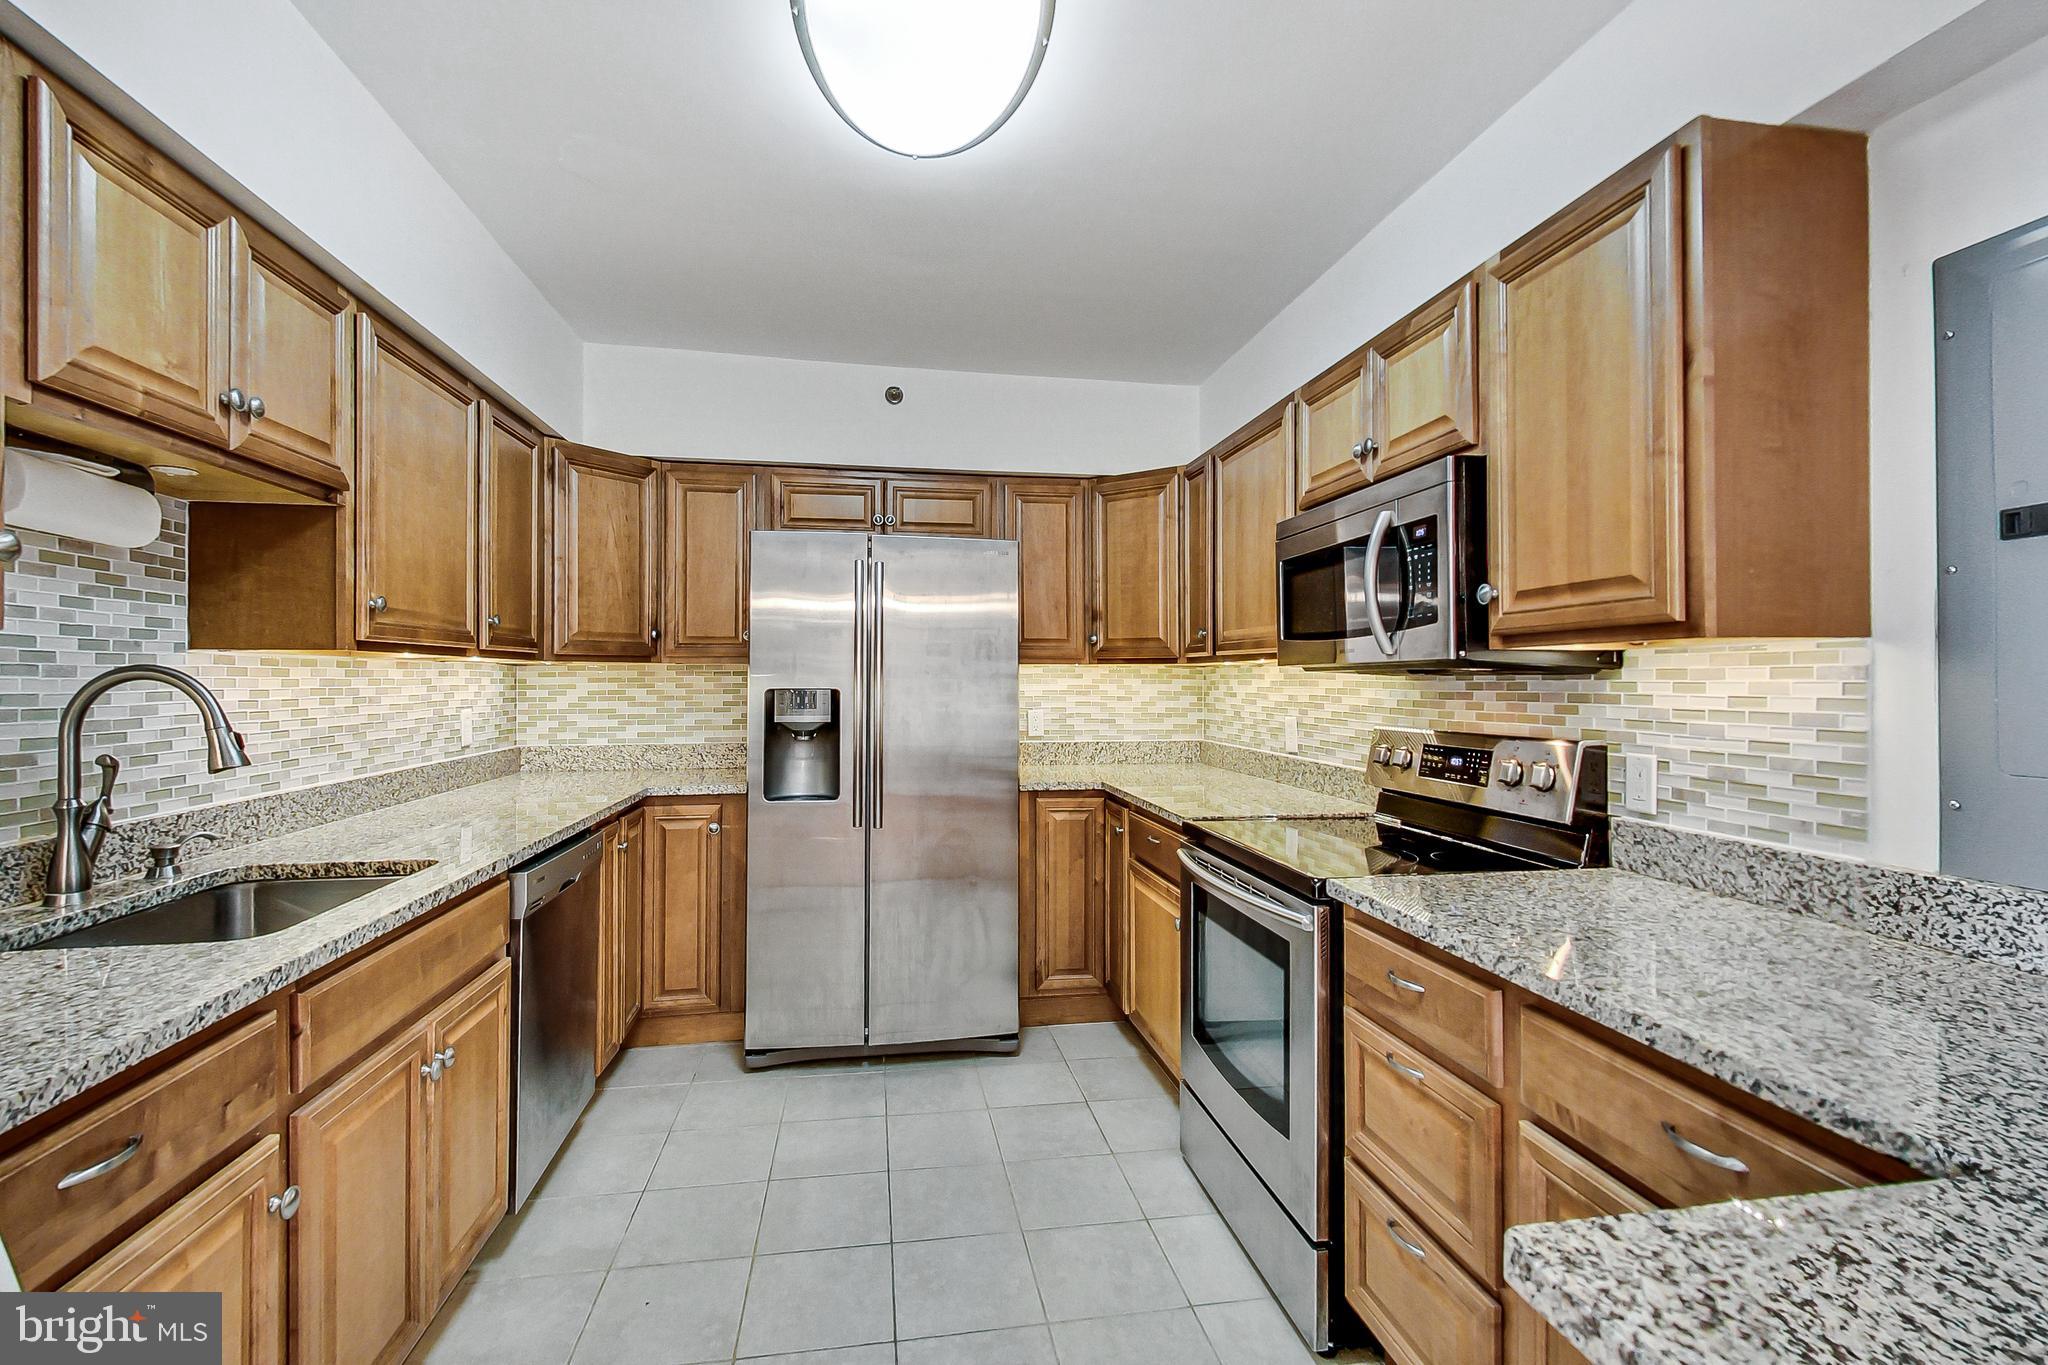 a kitchen with stainless steel appliances granite countertop a sink stove microwave and refrigerator